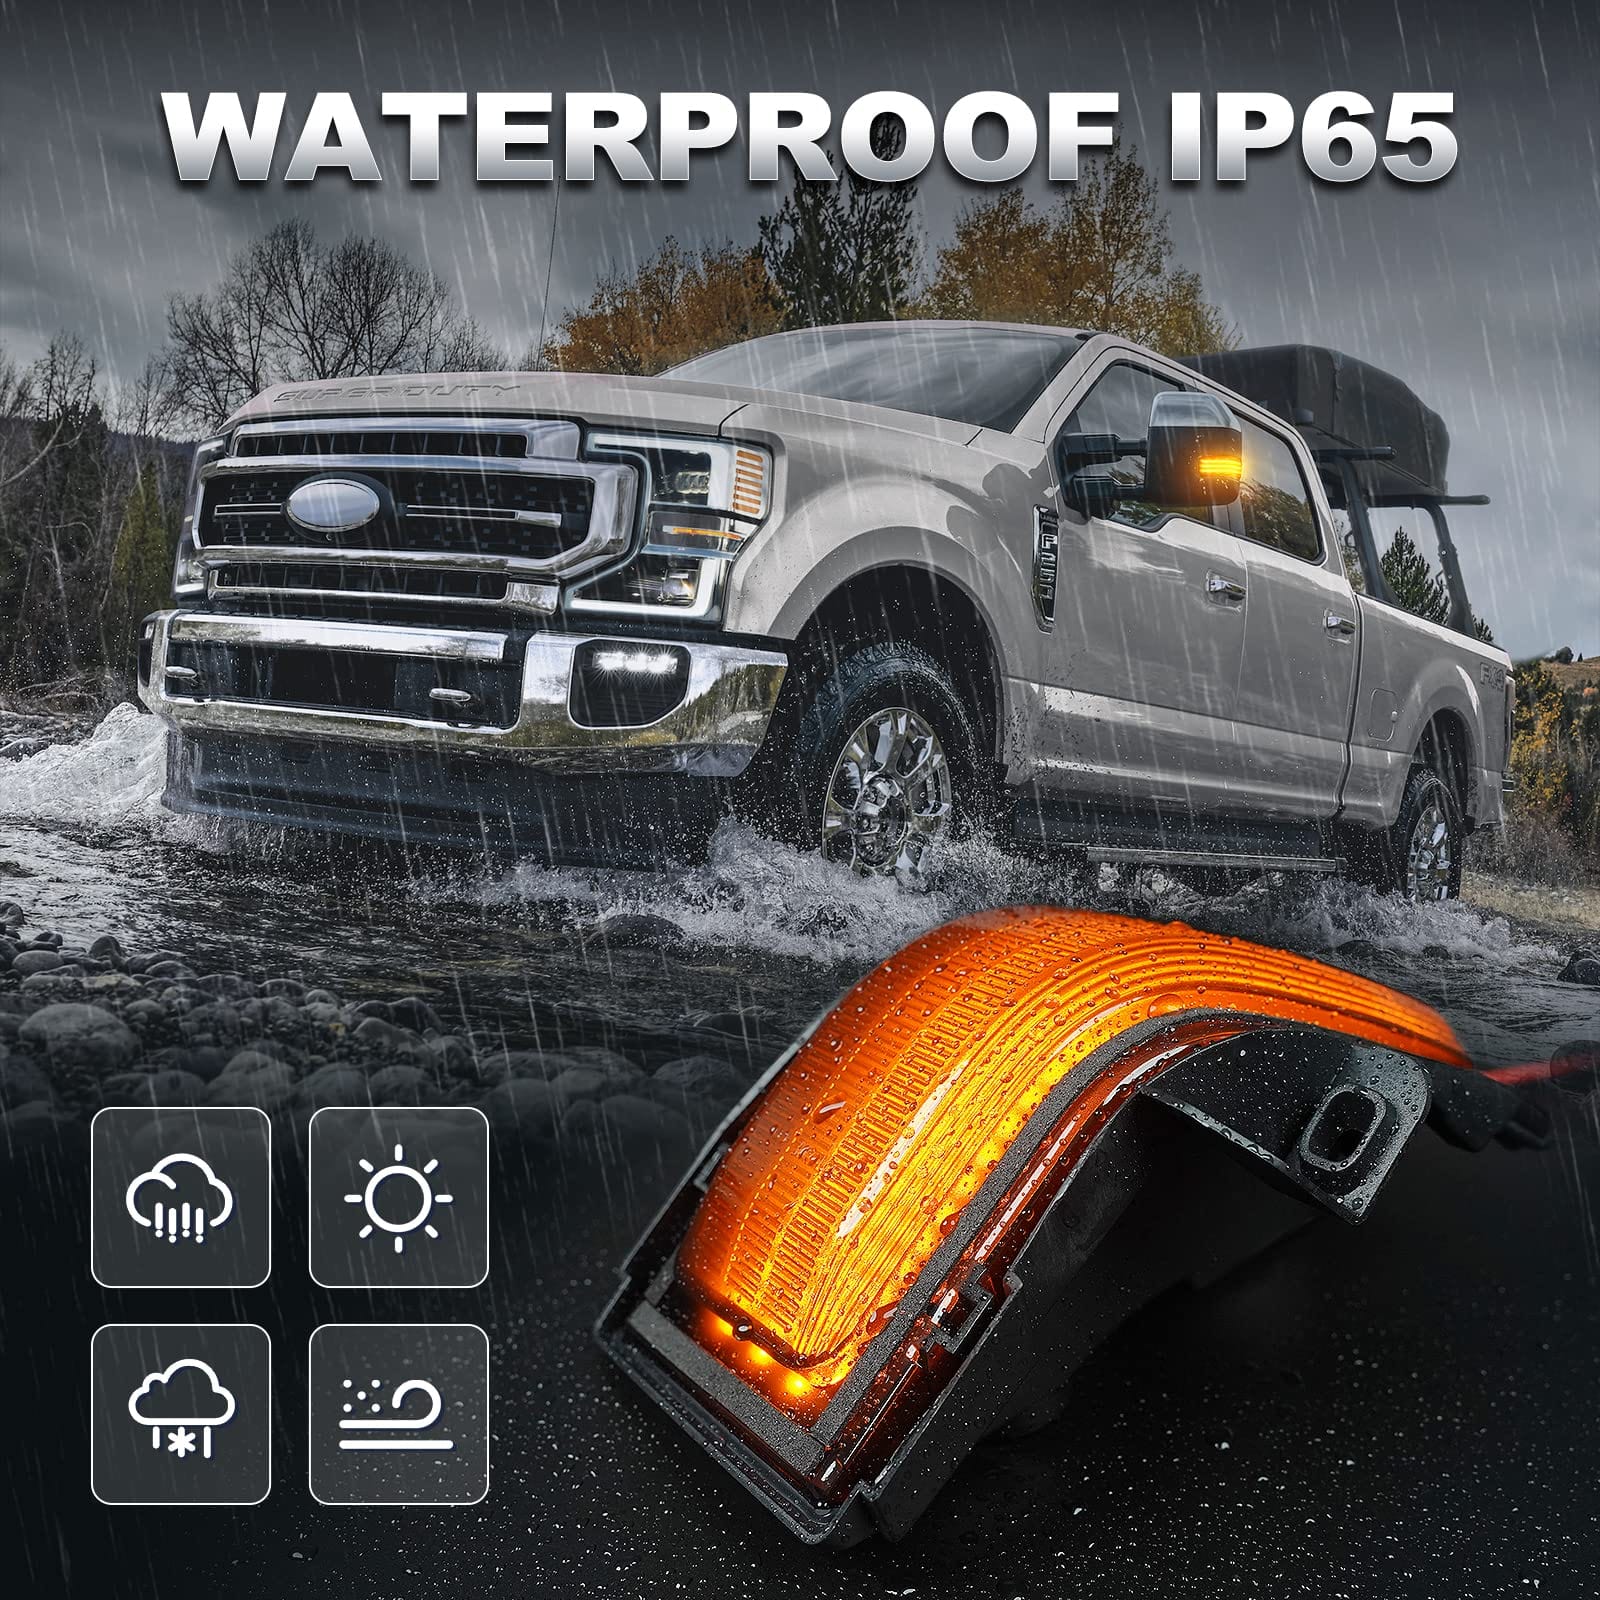 SUPAREE Ford F150 LED Lights with Sequential Running & Turn Signal